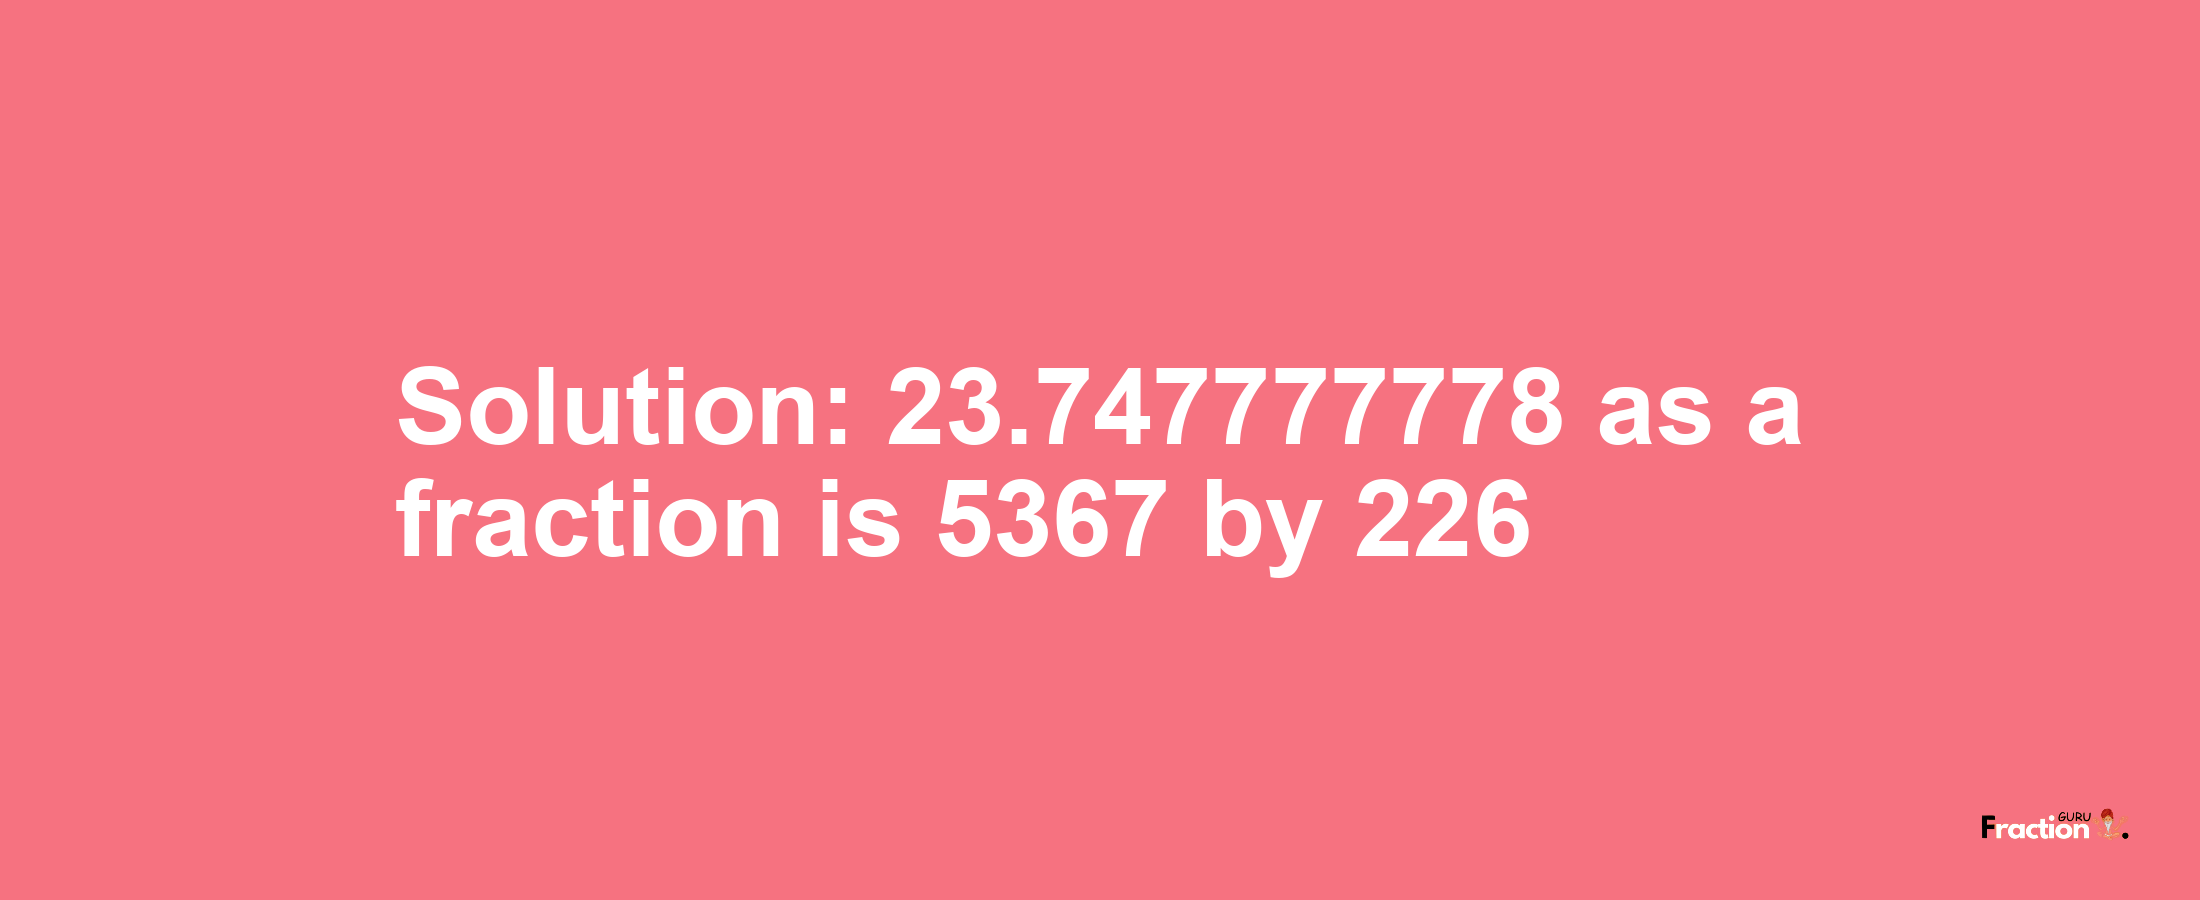 Solution:23.747777778 as a fraction is 5367/226